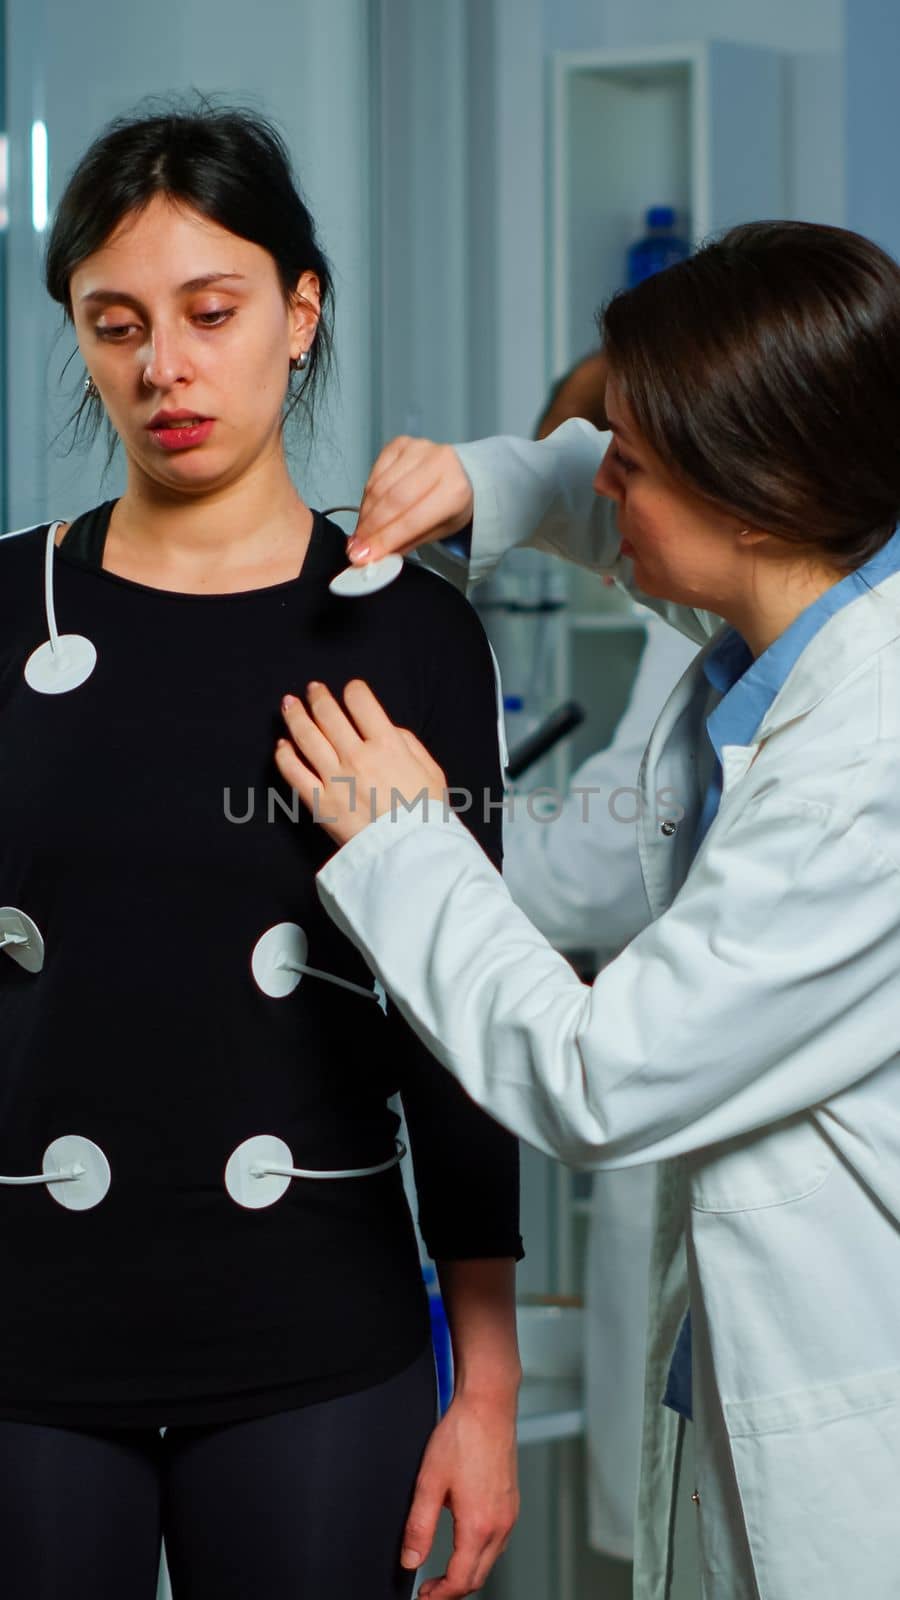 Scientist researcher preparing woman patient for endurance test attaching electrodes on professional body equipment. Team of doctors monitoring health of patinet, vo2, ekg scan runs on computer screen.